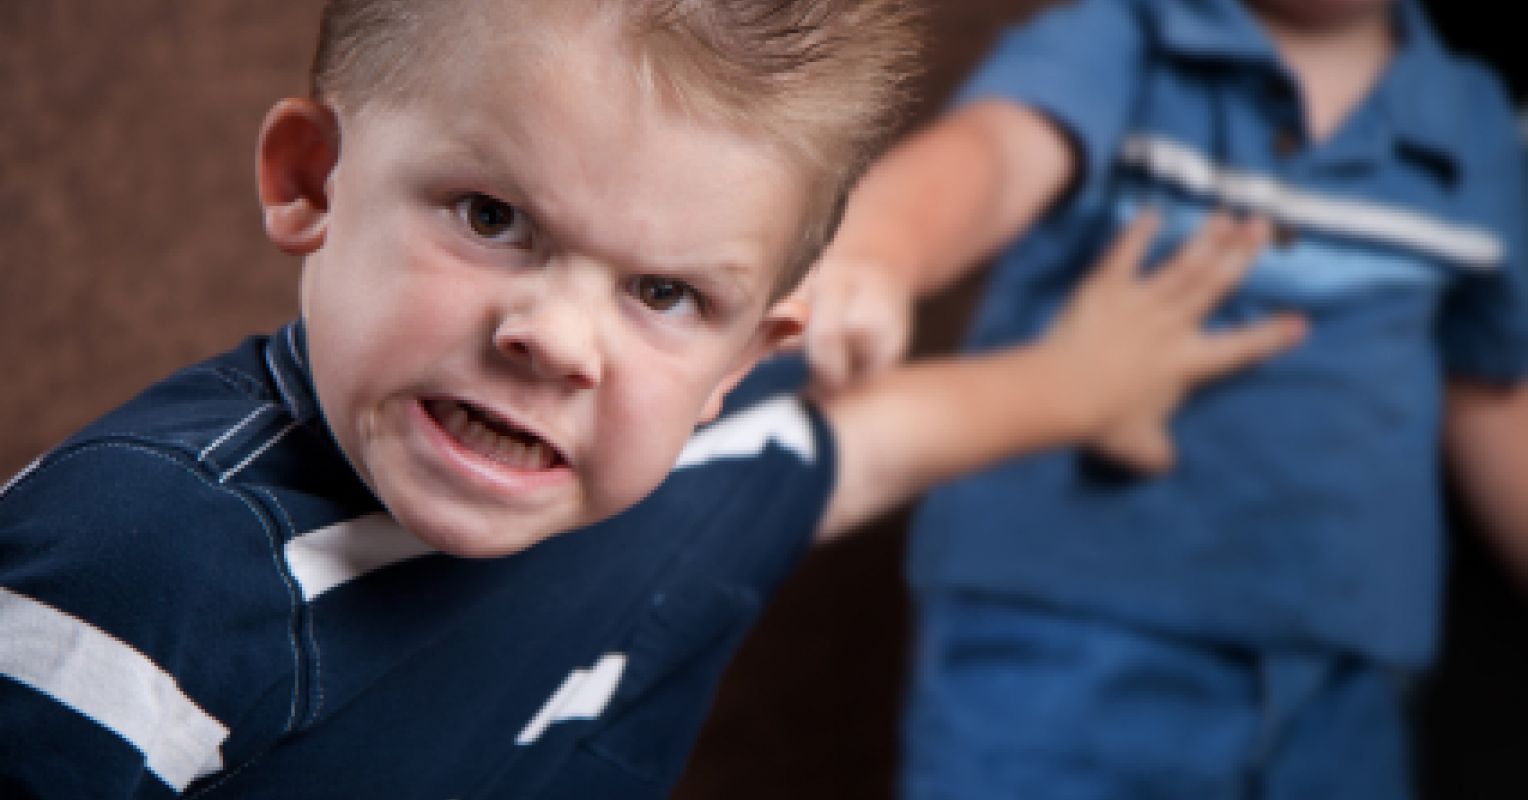 10 Steps to Stop Your Child From Hitting Other Kids Psychology Today